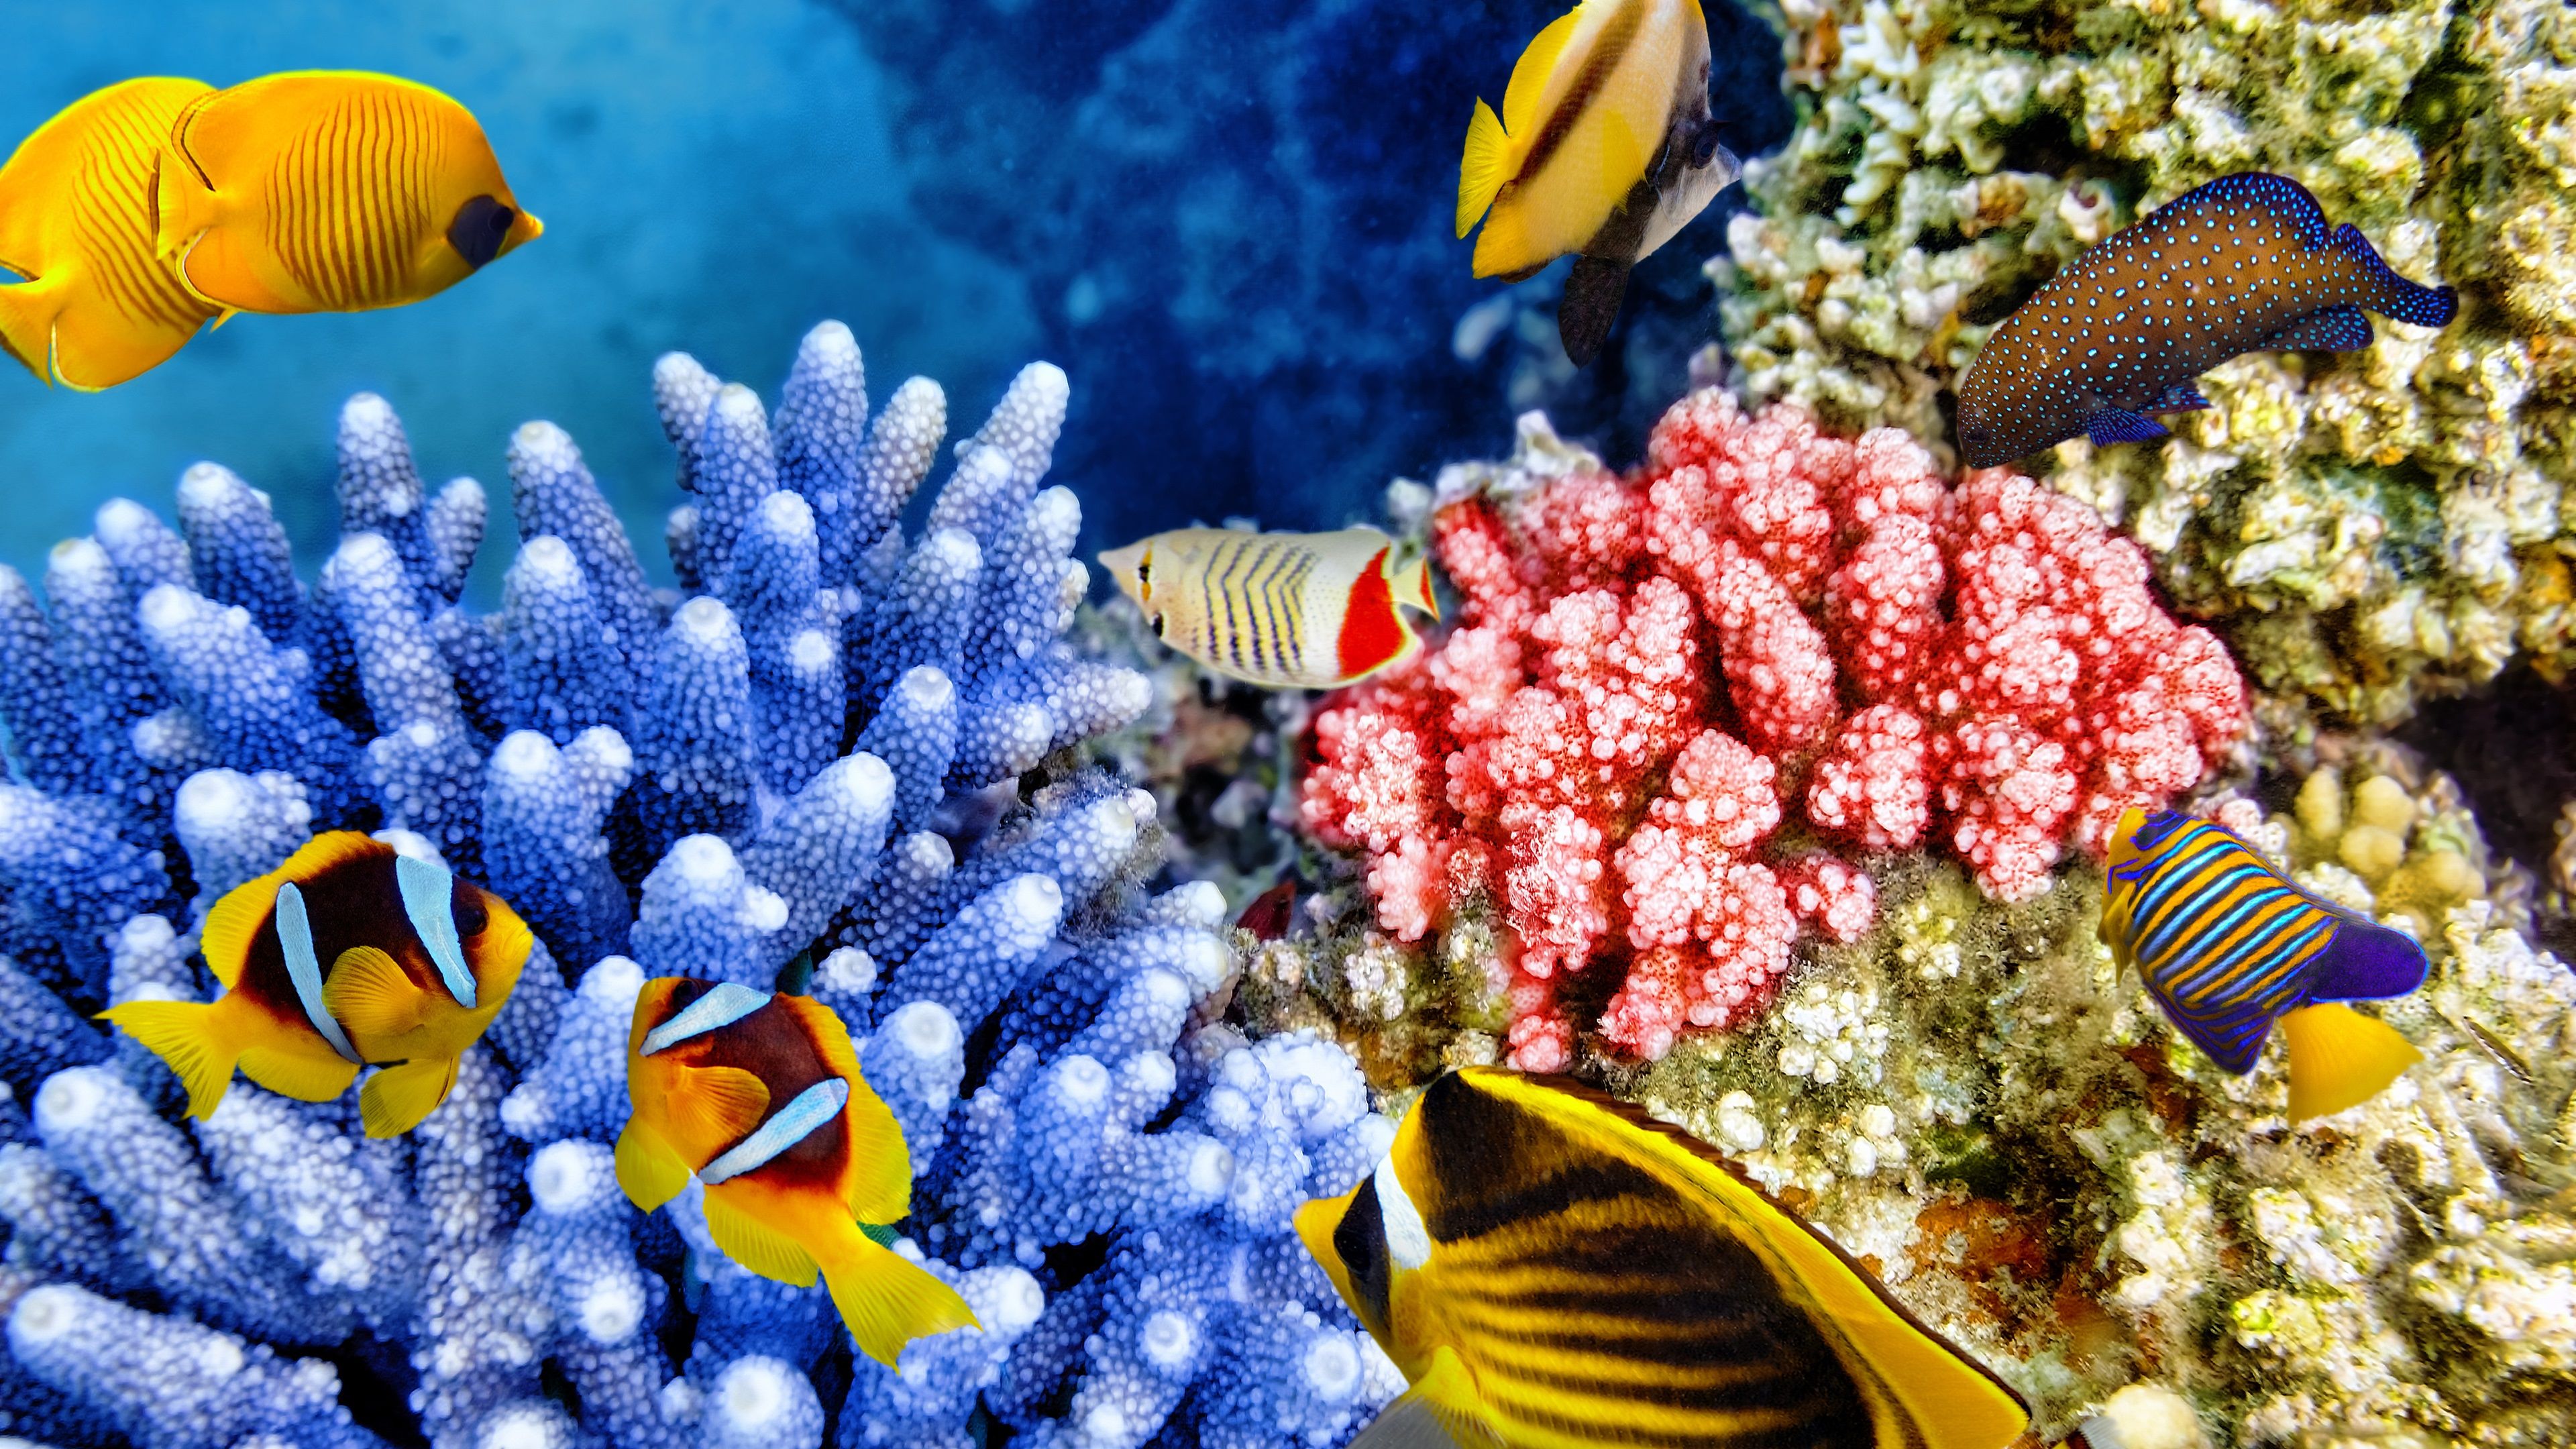 Wallpaper Tropical fishes, coral, underwater, sea animals 3840x2160 UHD 4K Picture, Image